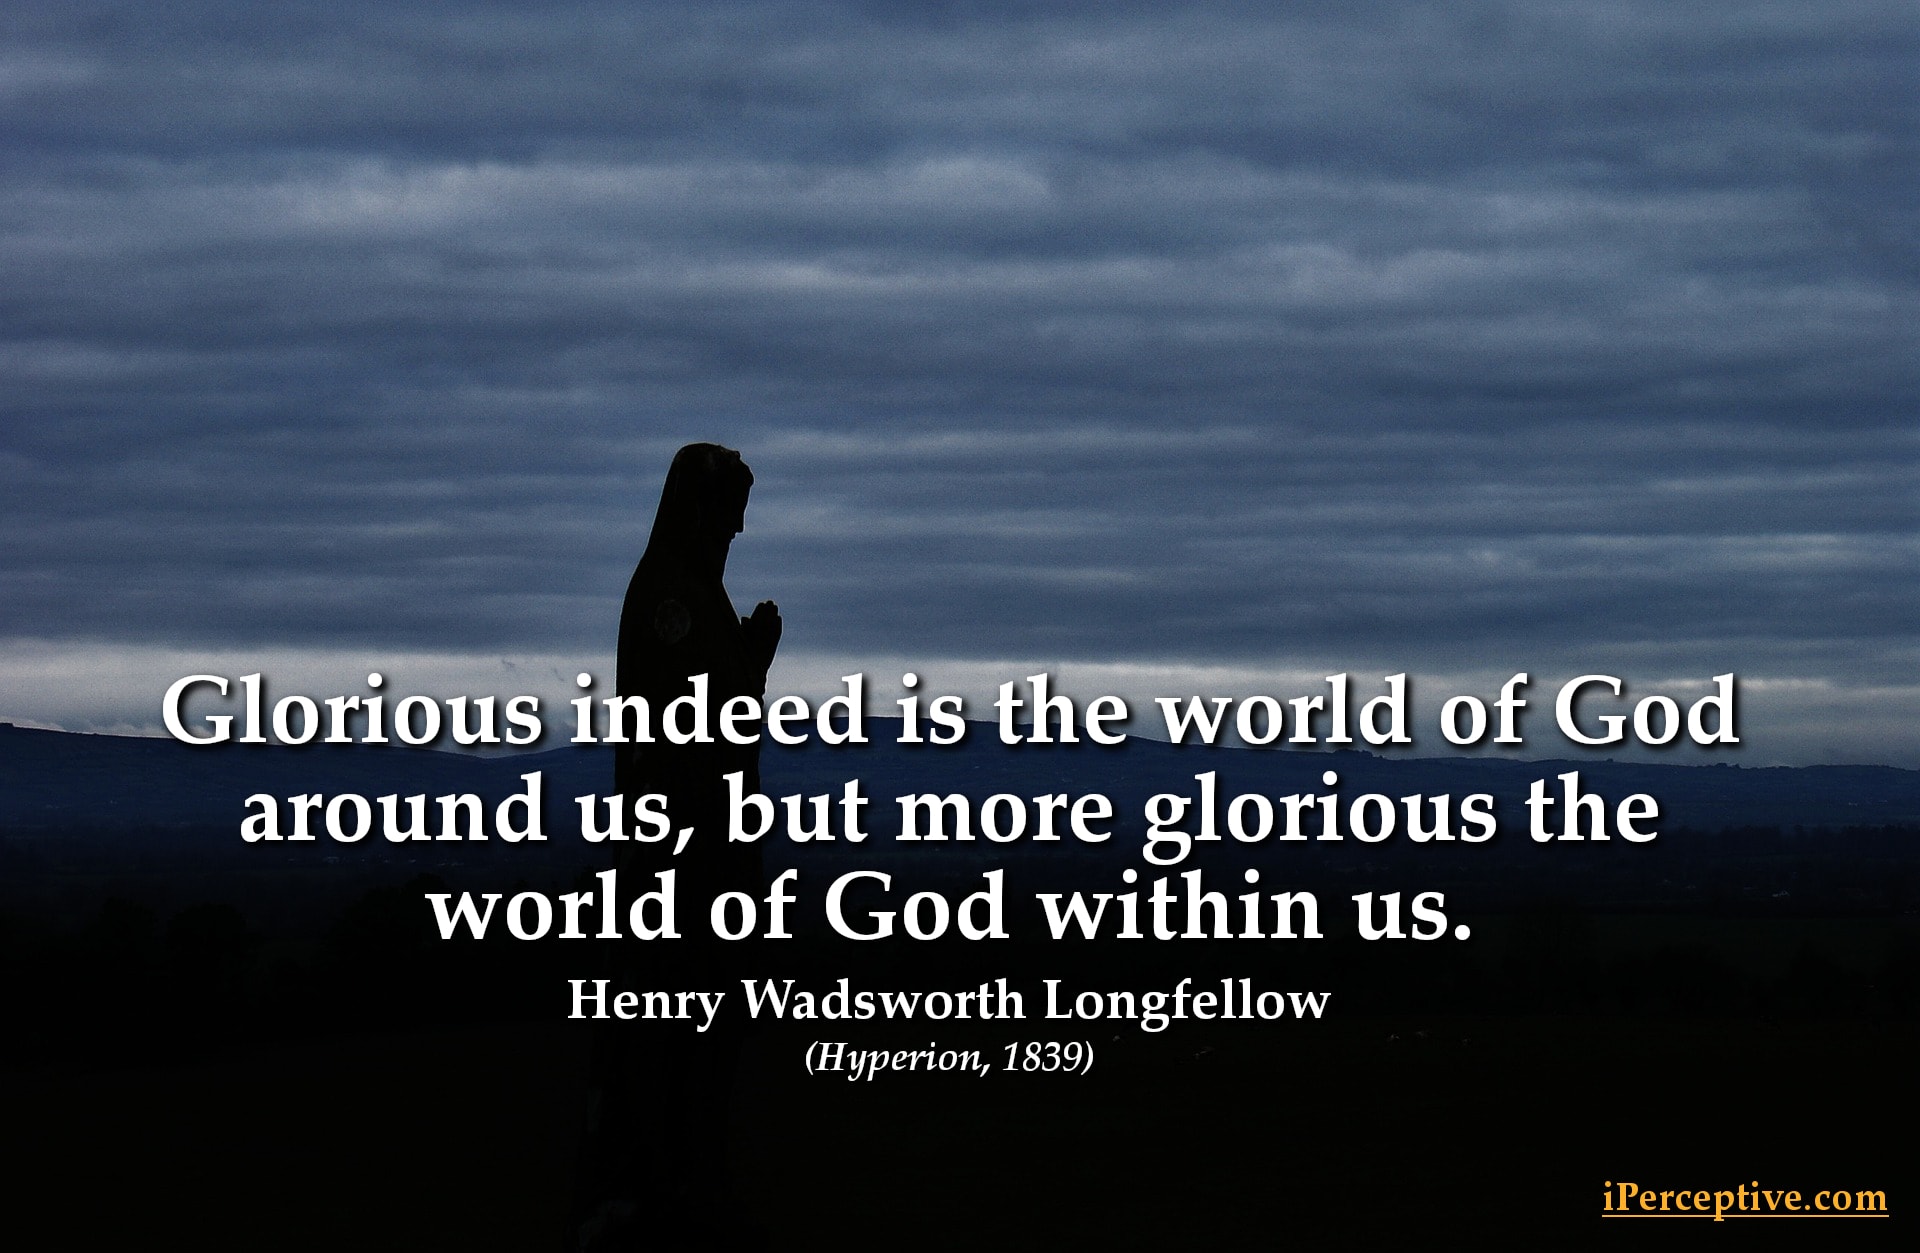 Wadsworth Quote: Glorious indeed is the world of God around us...